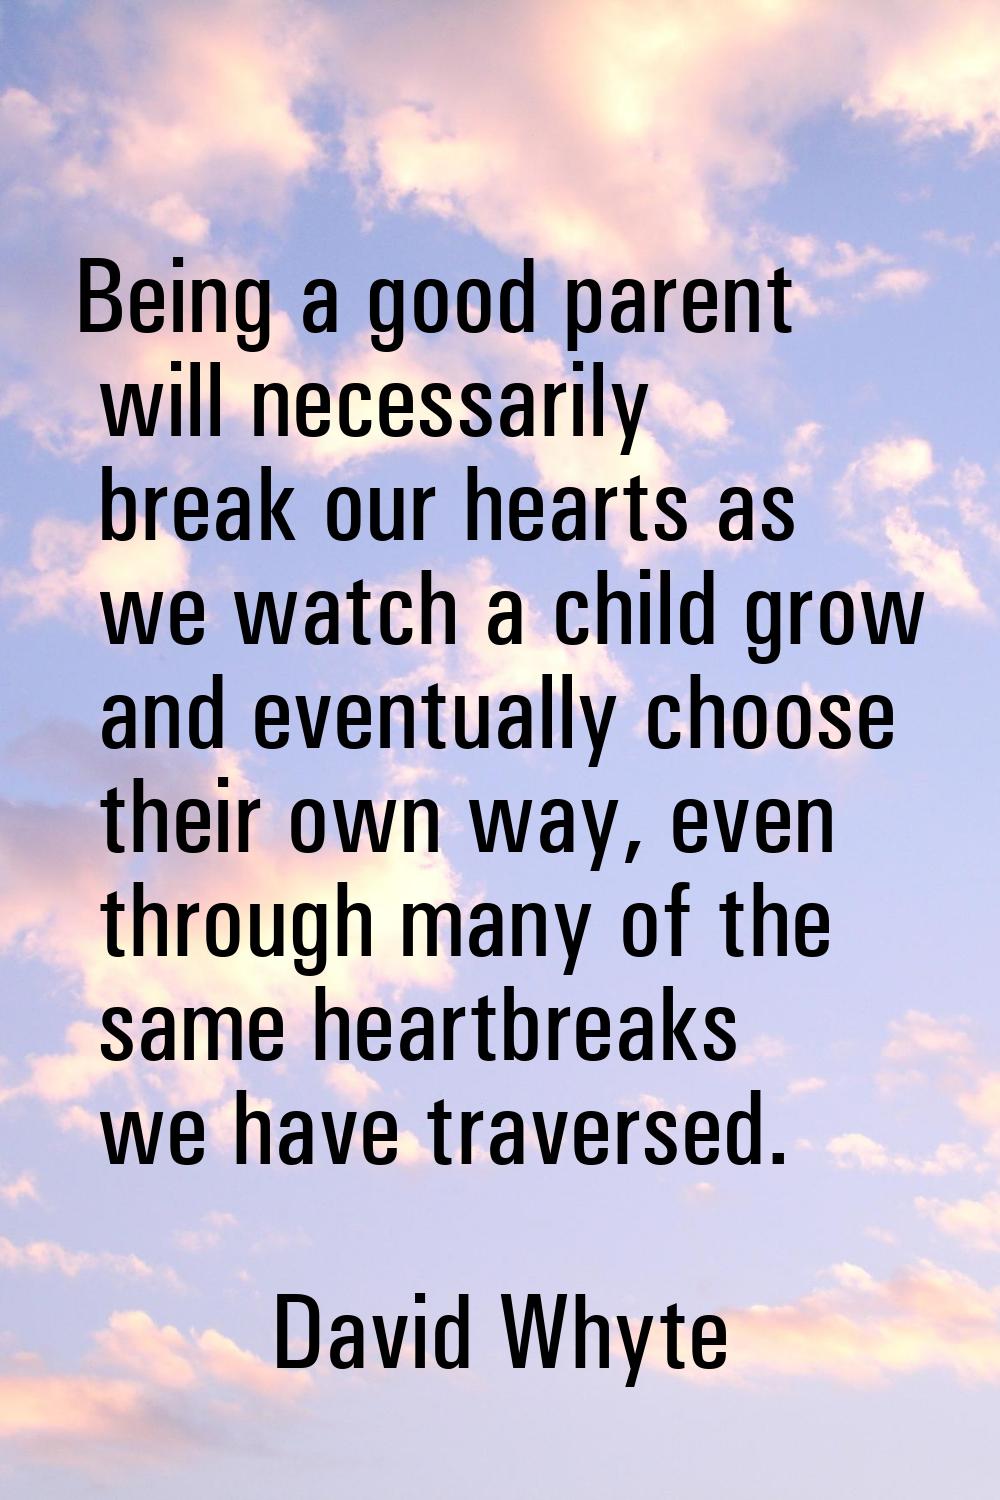 Being a good parent will necessarily break our hearts as we watch a child grow and eventually choos